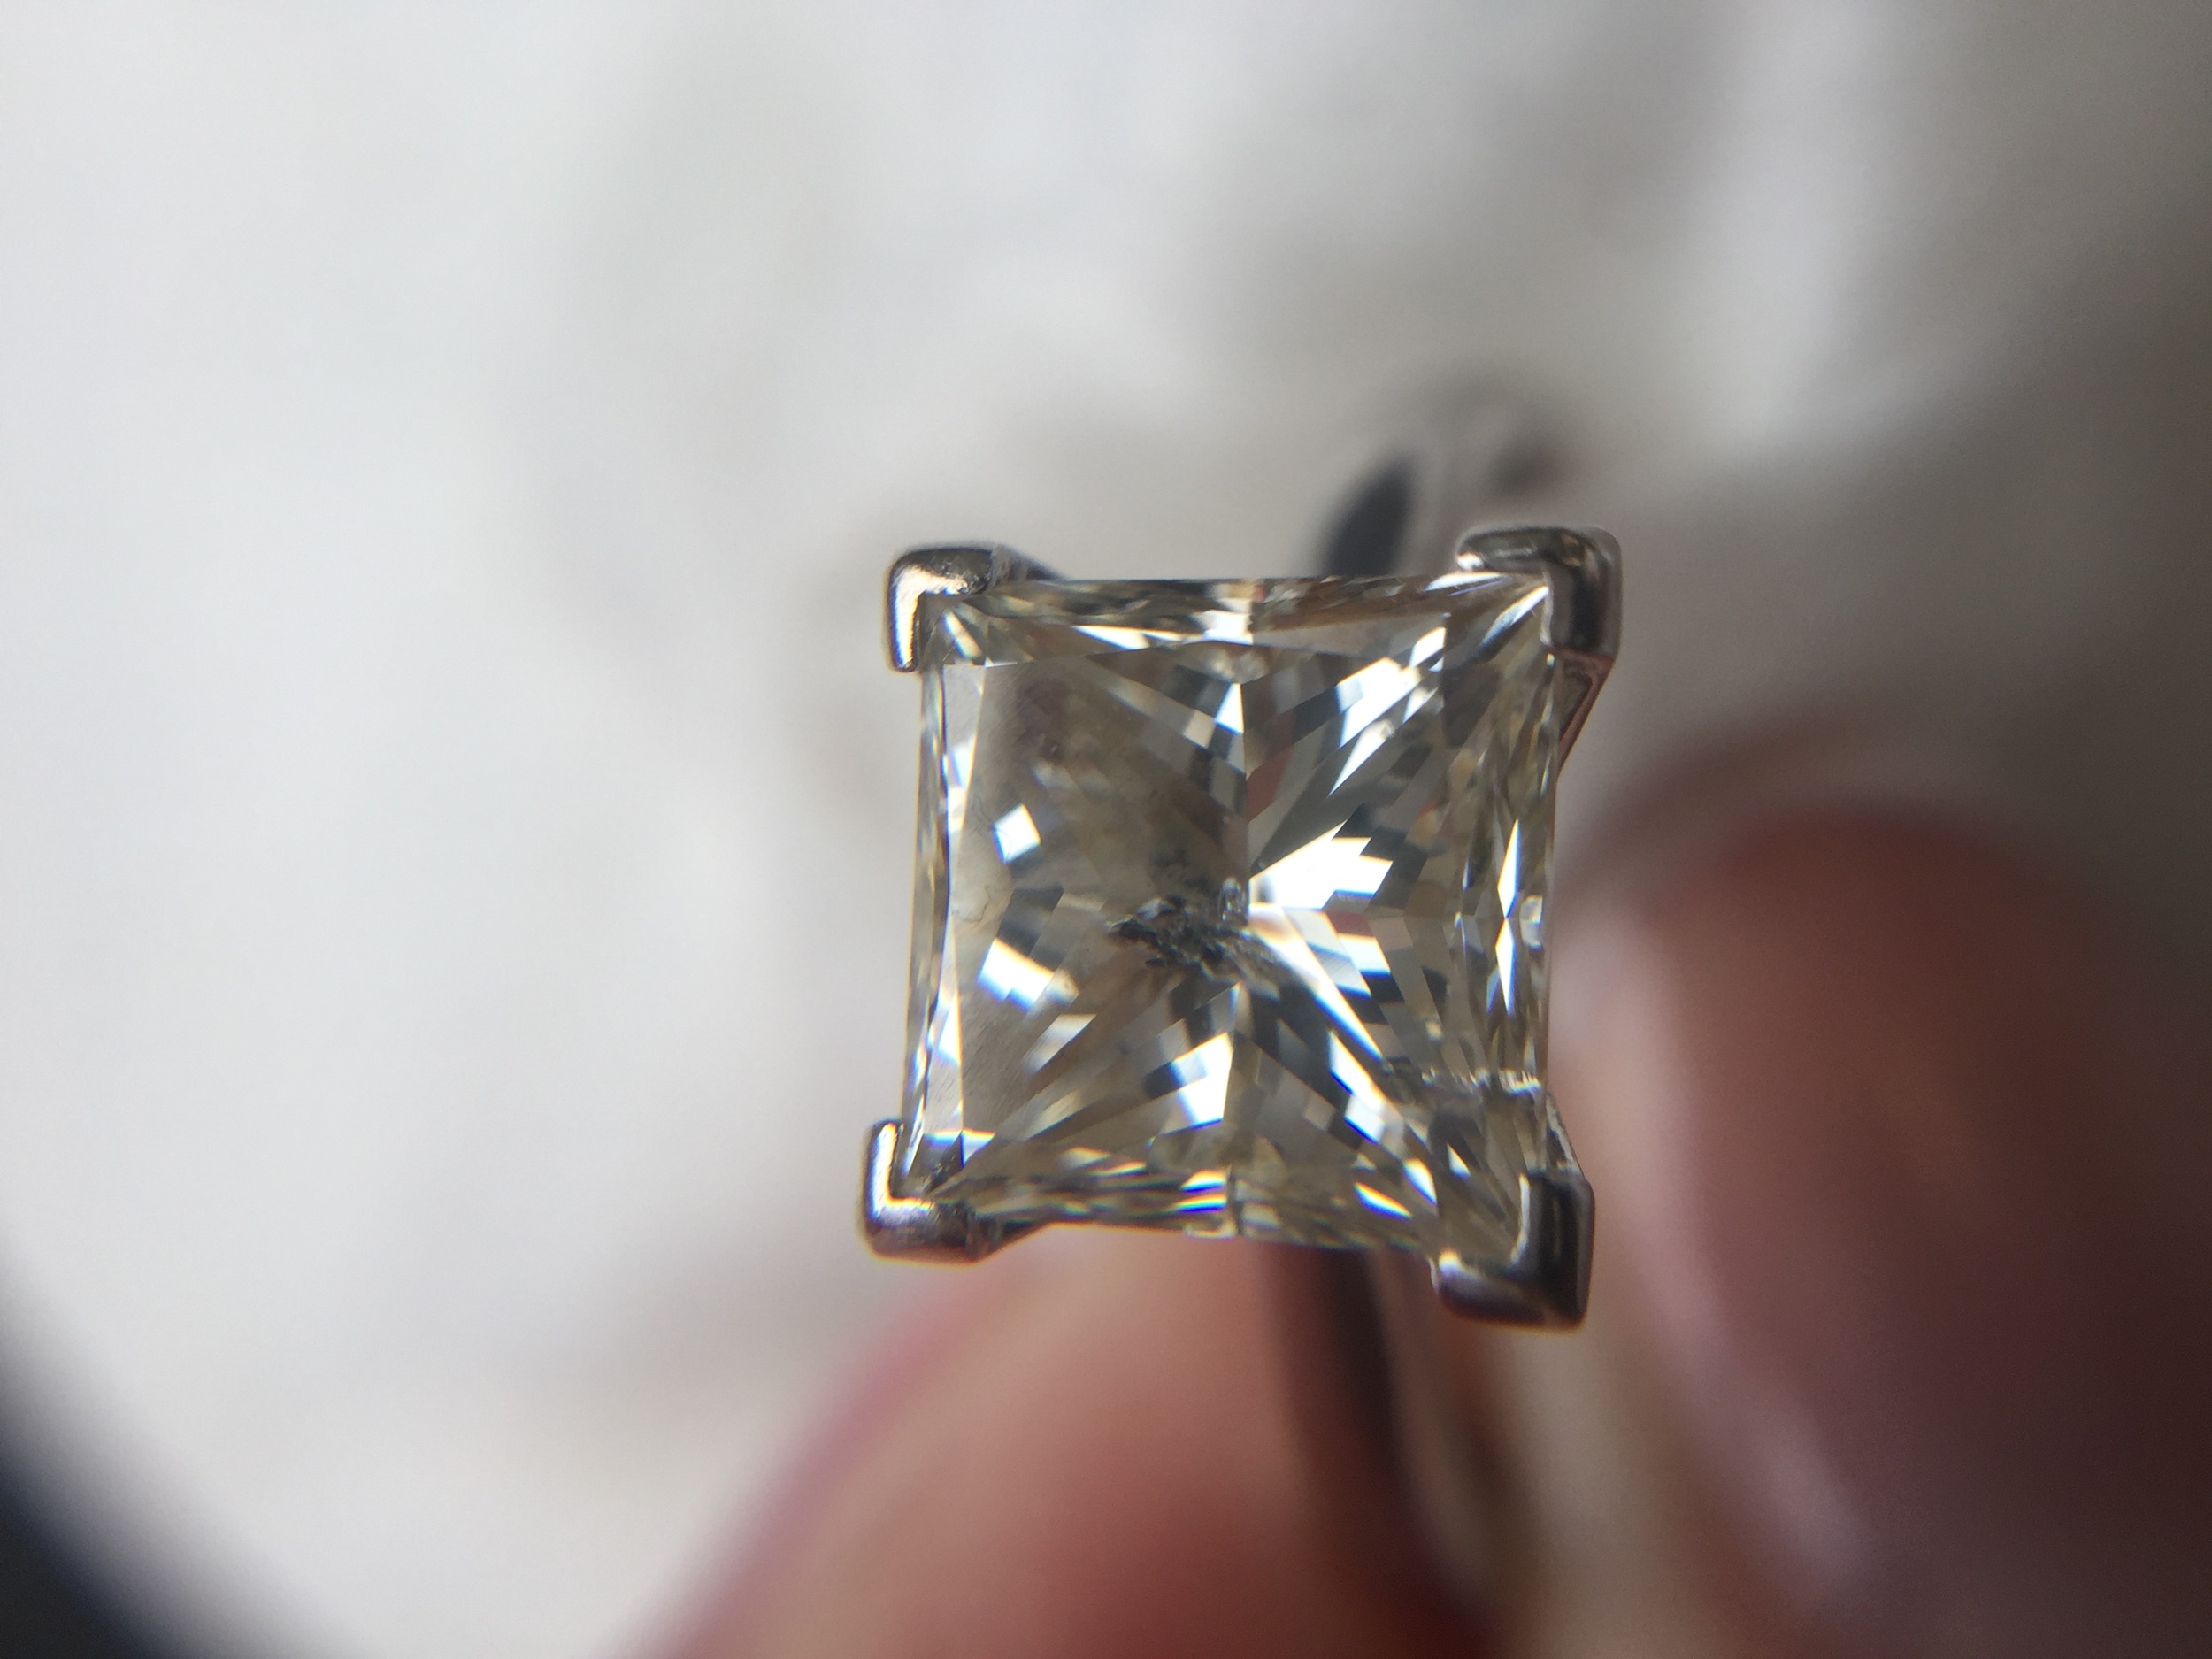 AN IMPRESSIVE DIAMOND SOLITAIRE RING - Image 6 of 9